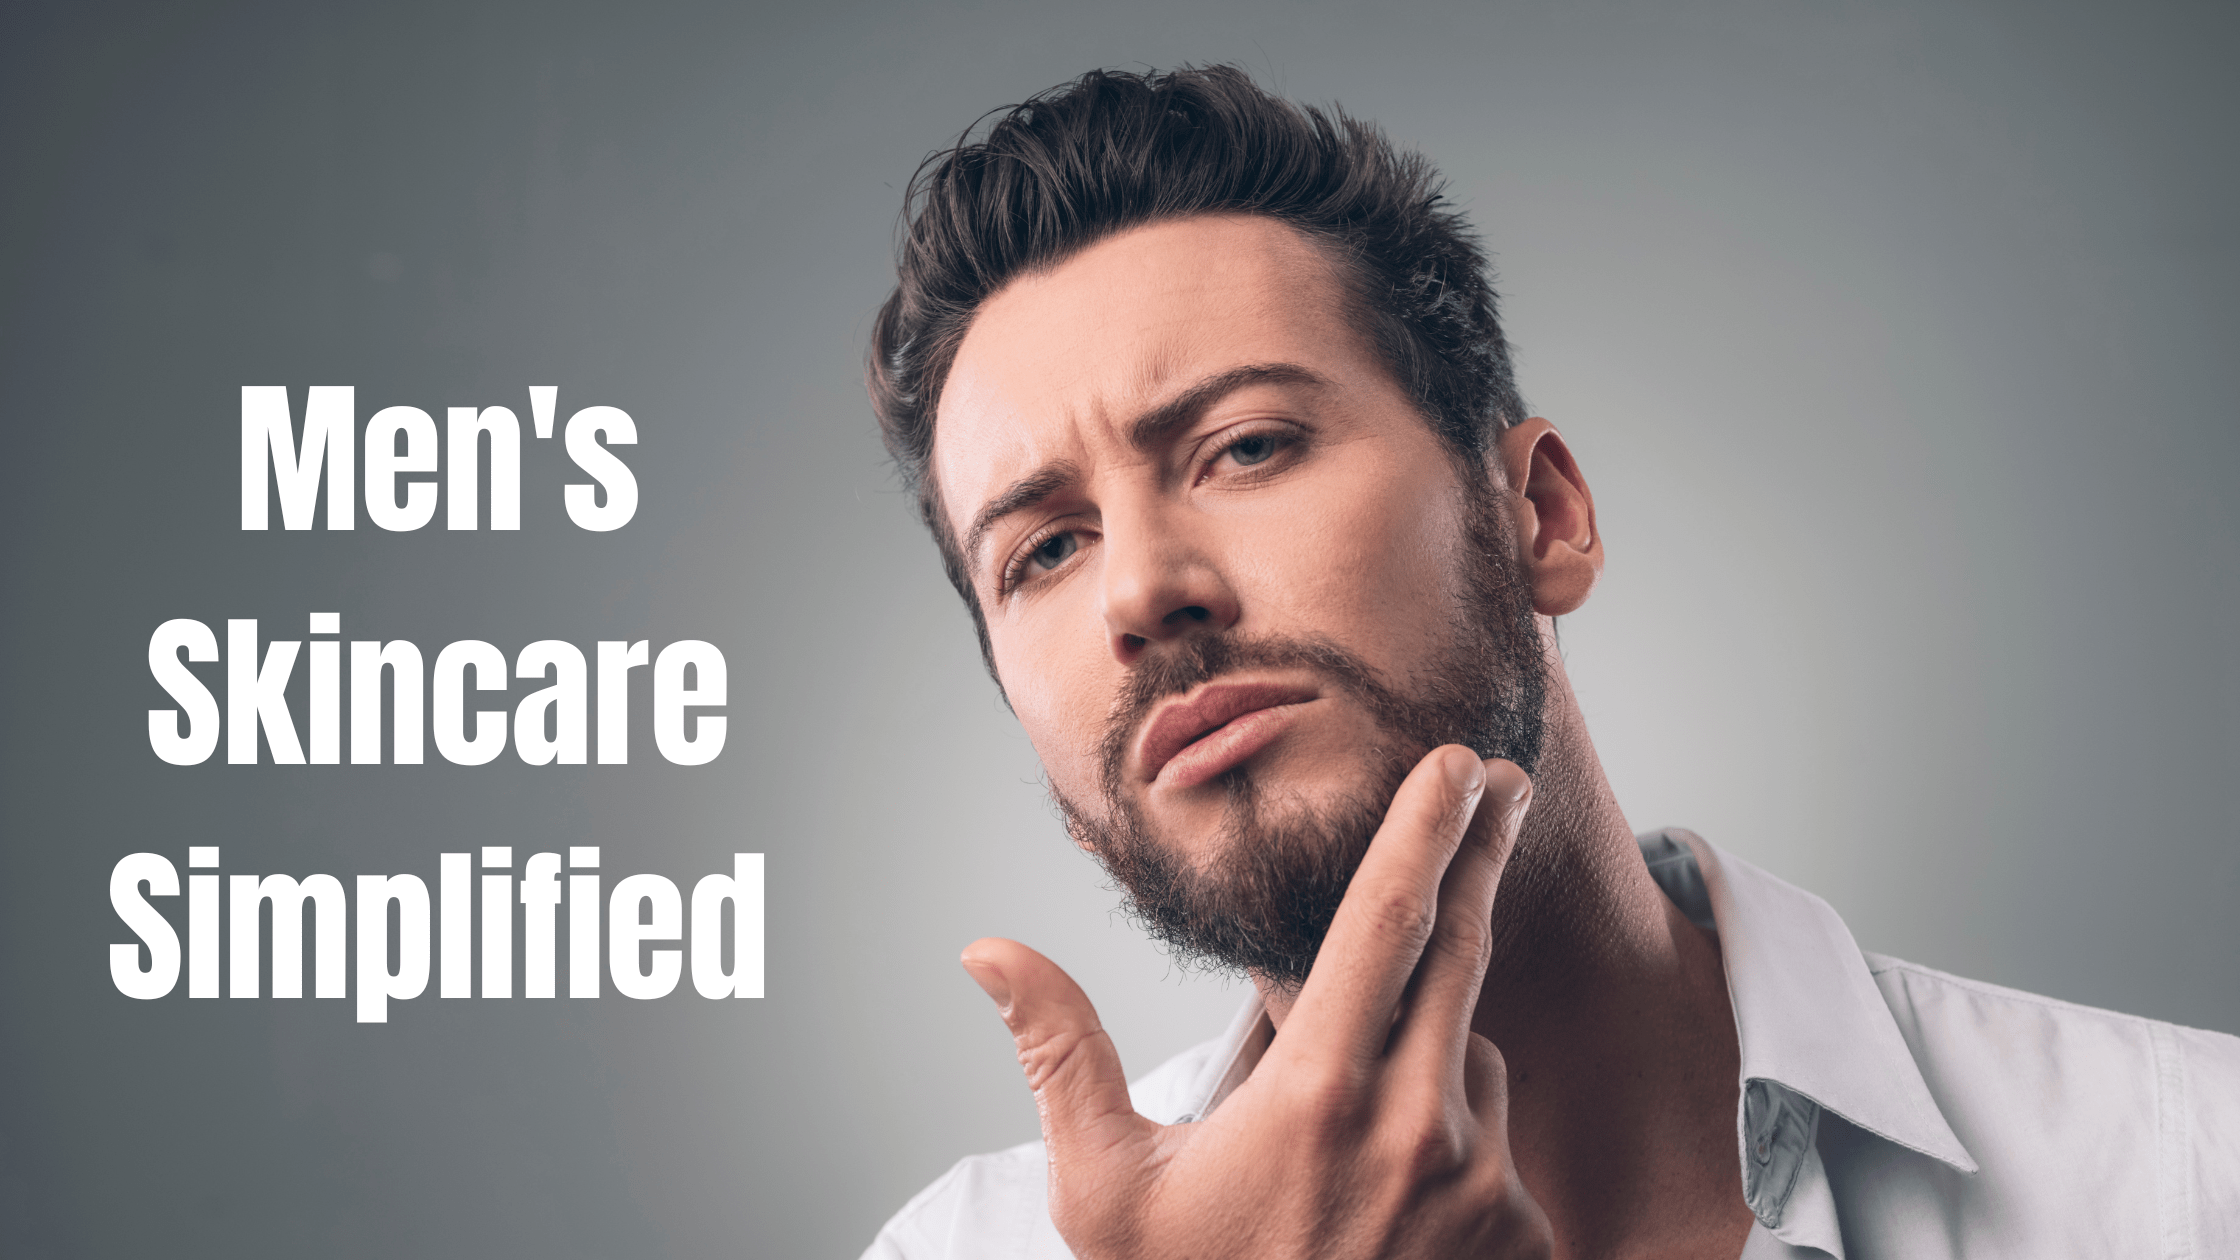 "'Men's Skincare Simplified: Your Ultimate Guide by Epicorium Experts' featuring a confident man applying skincare products with a clear and informative overlay text, emphasizing the ease and expertise behind the ultimate skincare guide for men by Epicorium."